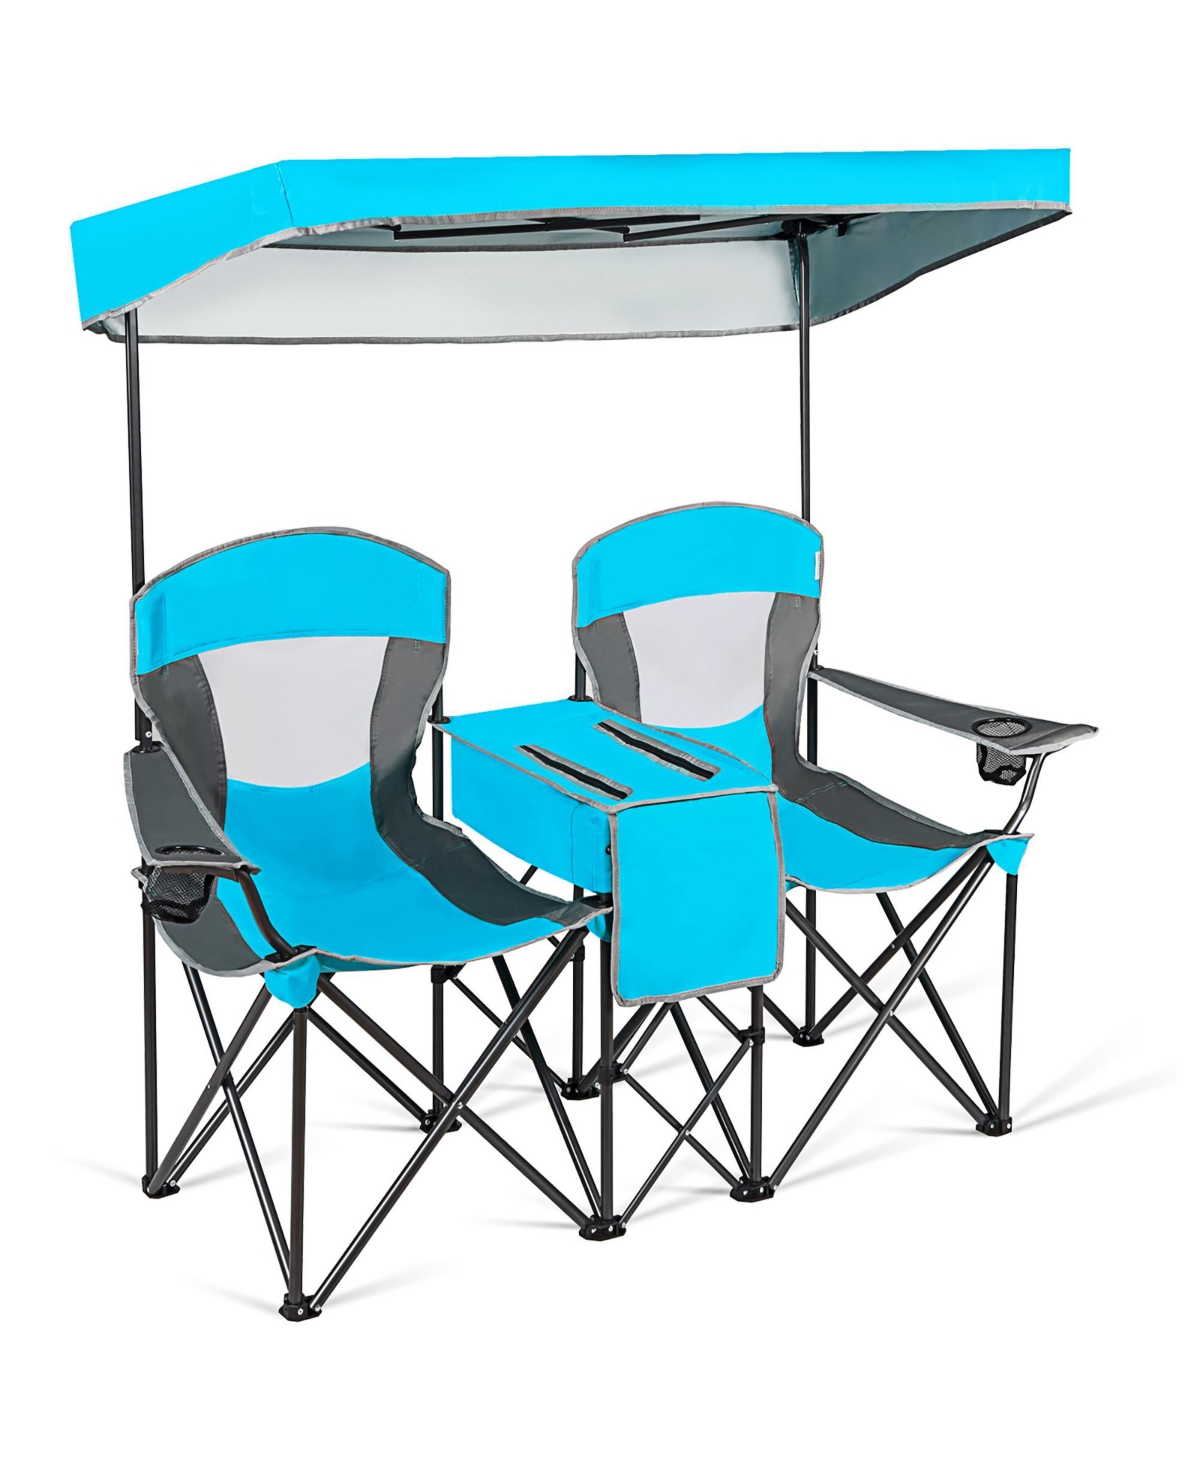 Portable Folding Camping Canopy Chairs w/ Cup Holder Cooler - Blue